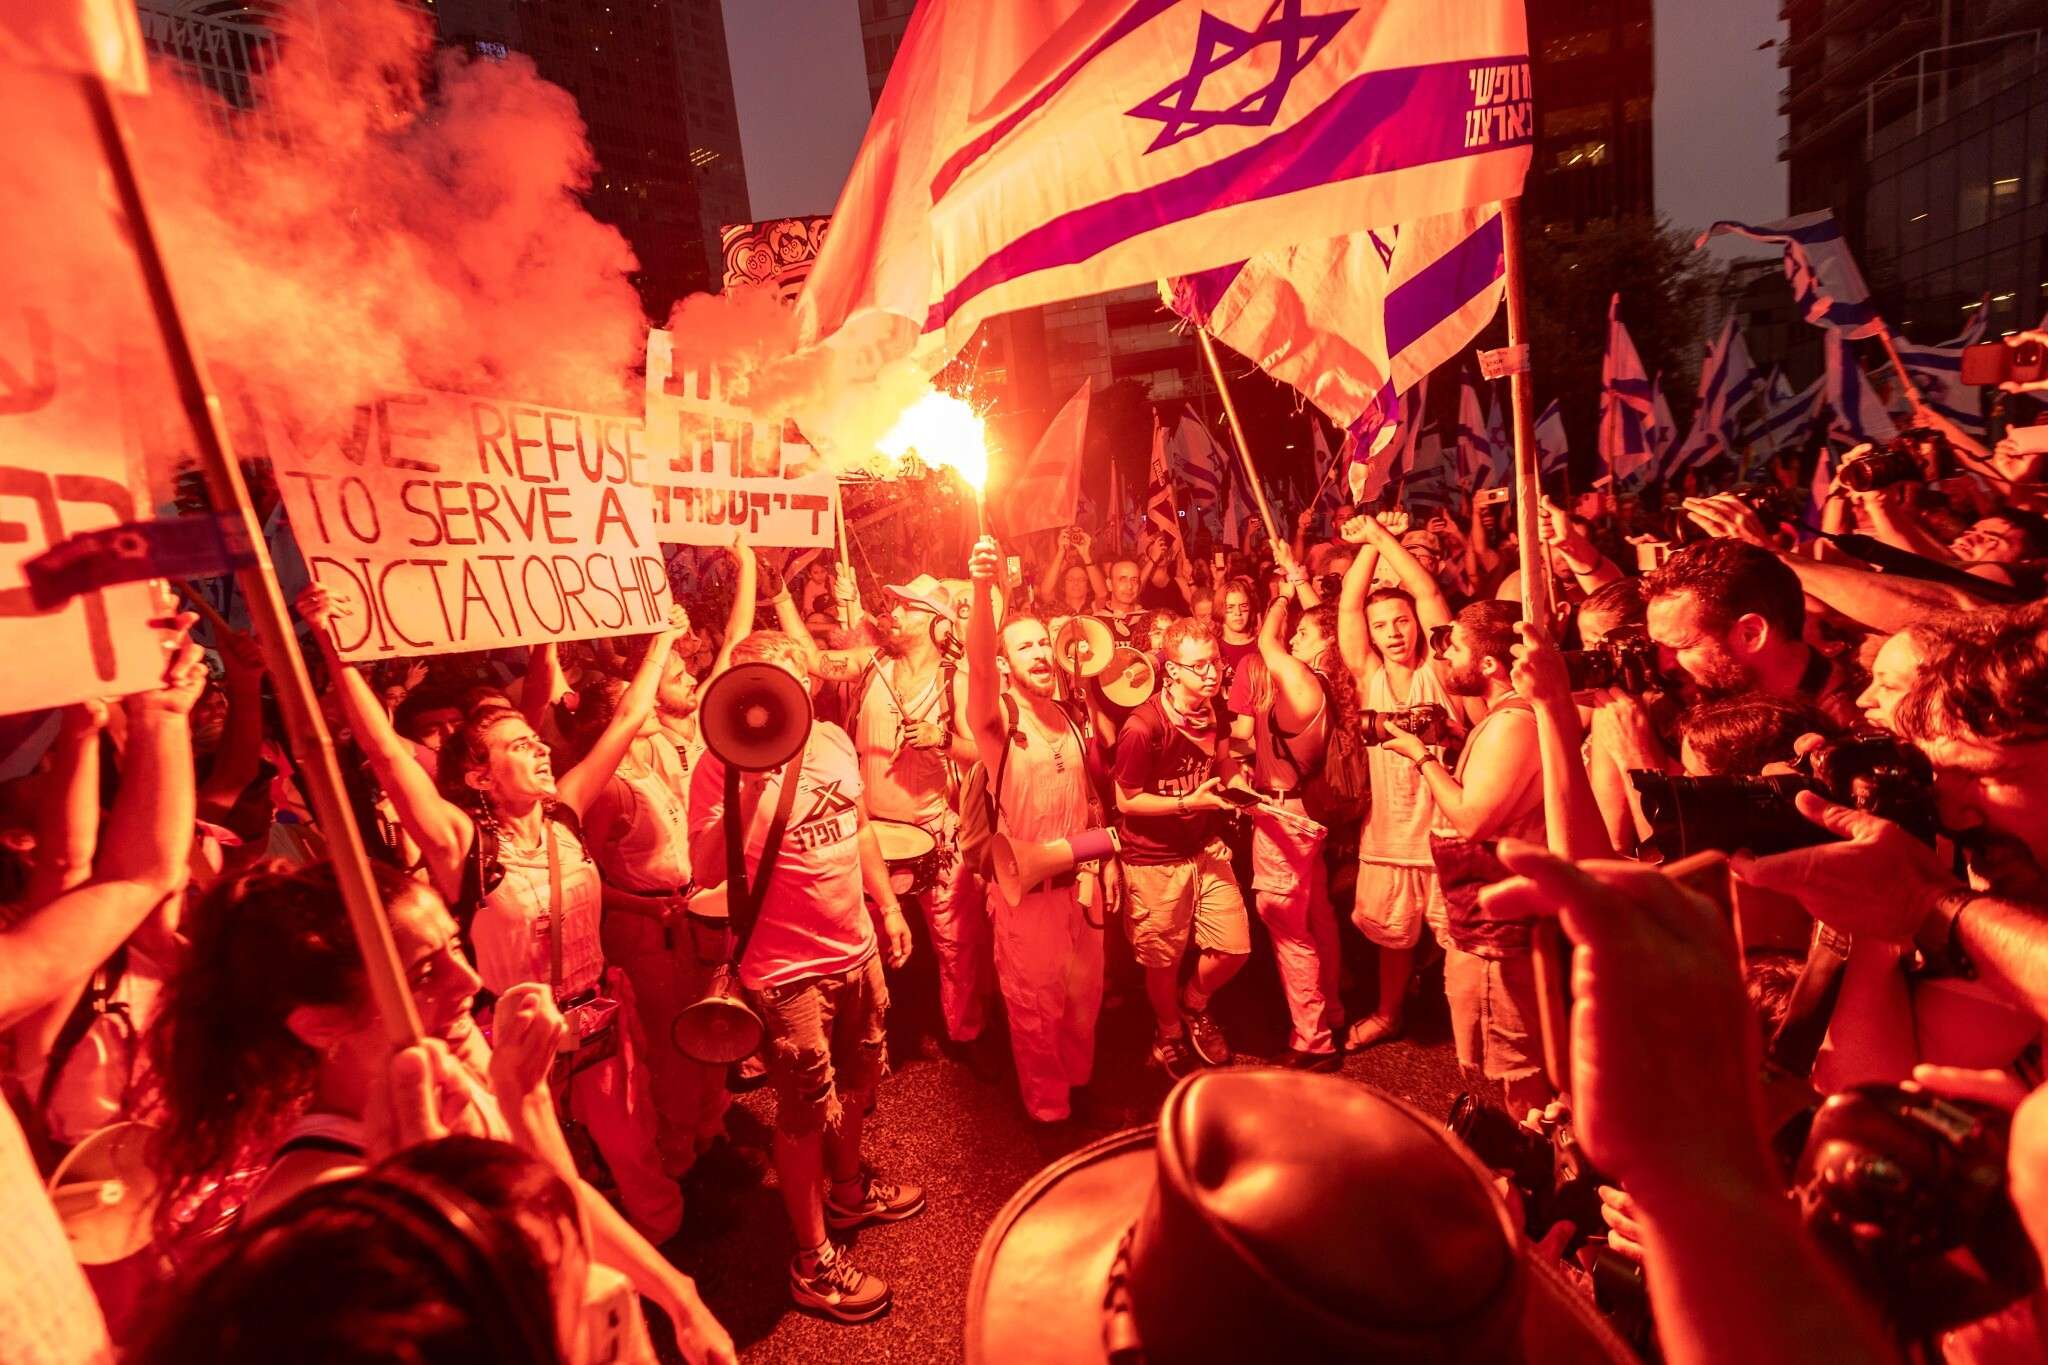 Israelis Seek Opportunities Abroad Amid Unrest At Home